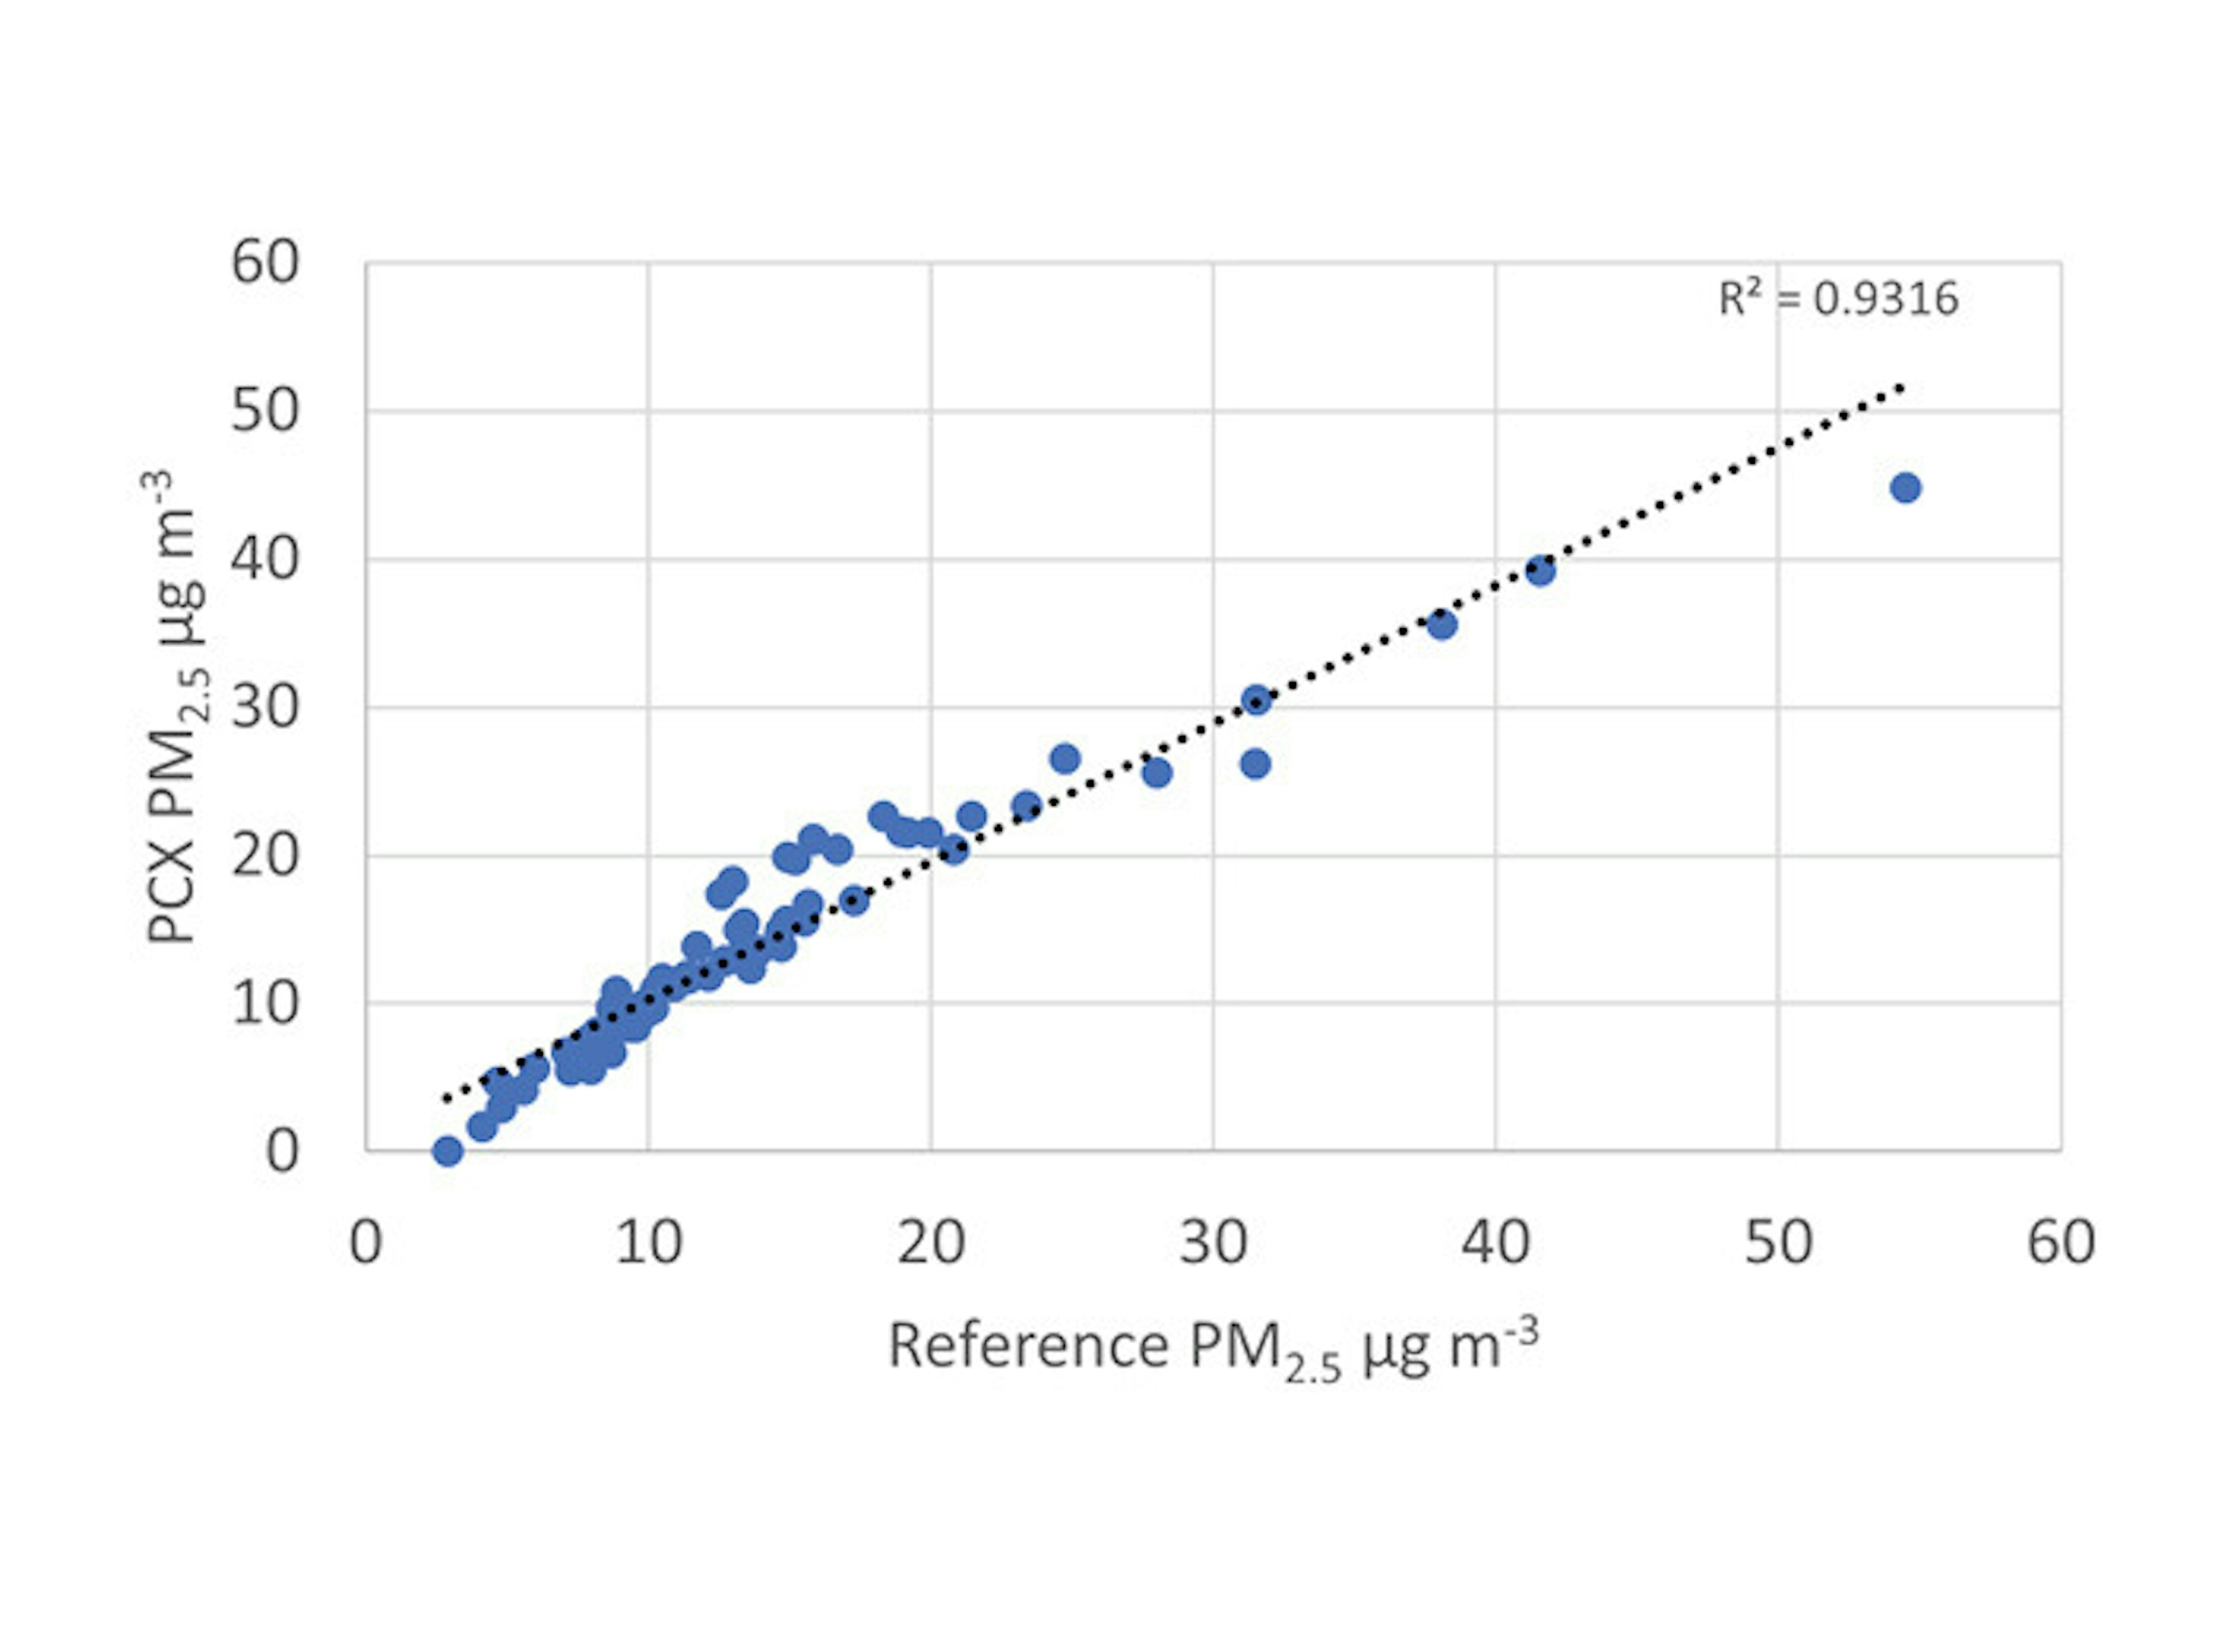 PCX module scatter plot of data with linear regression and coefficient of determination PM2.5